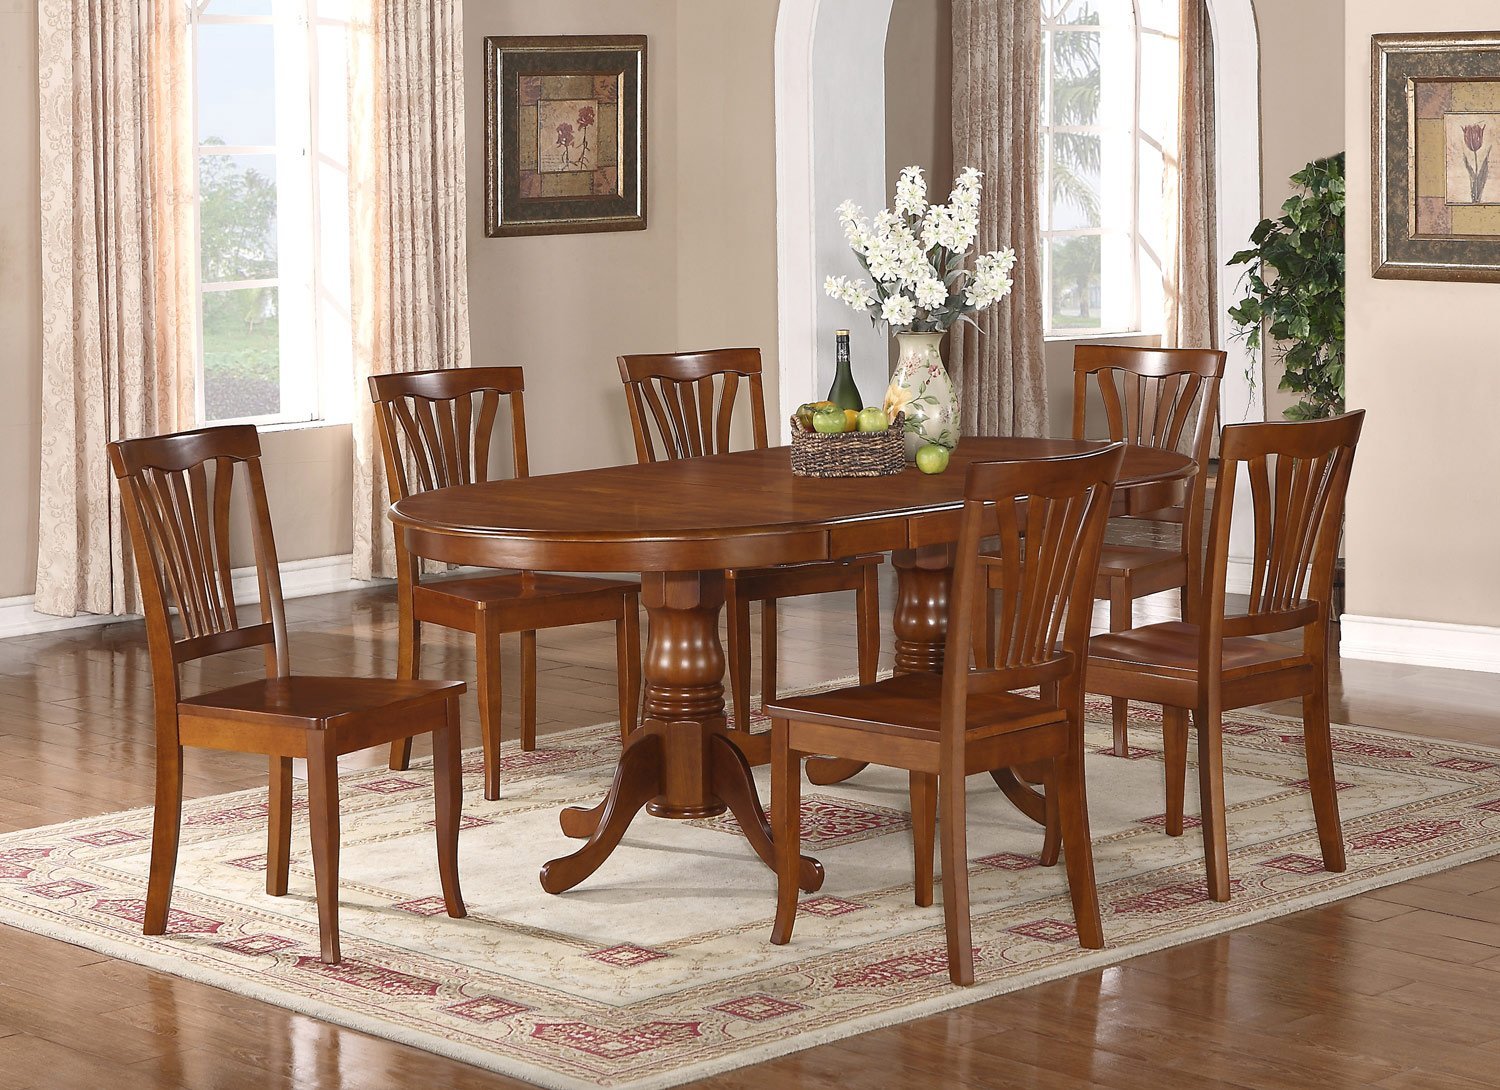 9-PC Newton Oval Dining Room Set Table + 8 Wood Seat Chairs in Saddle ...